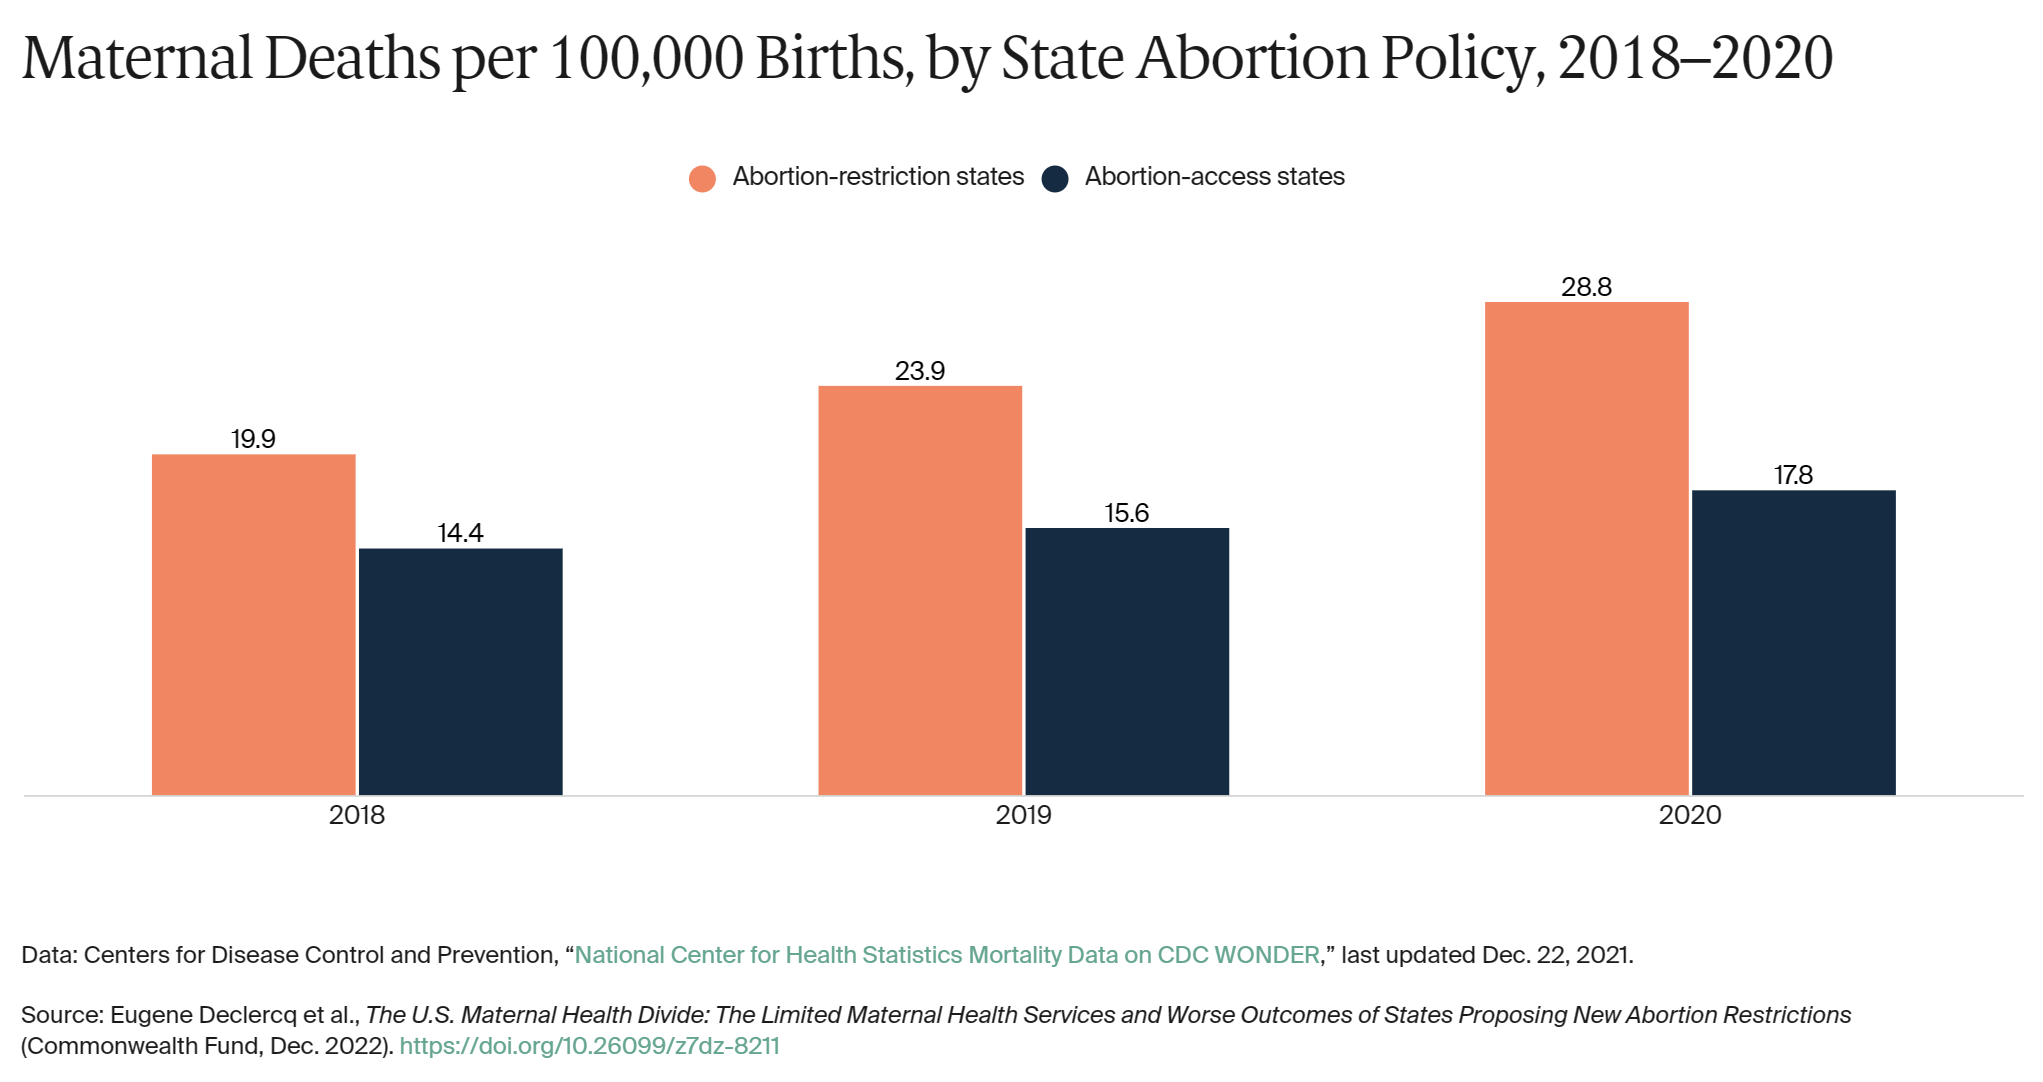 Maternal Deaths per 100,000 Births, by State Abortion Policy, 2018-2020. Maternal death rates were 62 percent higher in 2020 in abortion-restriction states than in abortion-access states (28.8 vs. 17.8 per 100,000 births). Notably, across the three years presented in this graph, the maternal mortality rate was increasing nearly twice as fast in states with abortion restrictions. Graphic: Commonwealth Fund